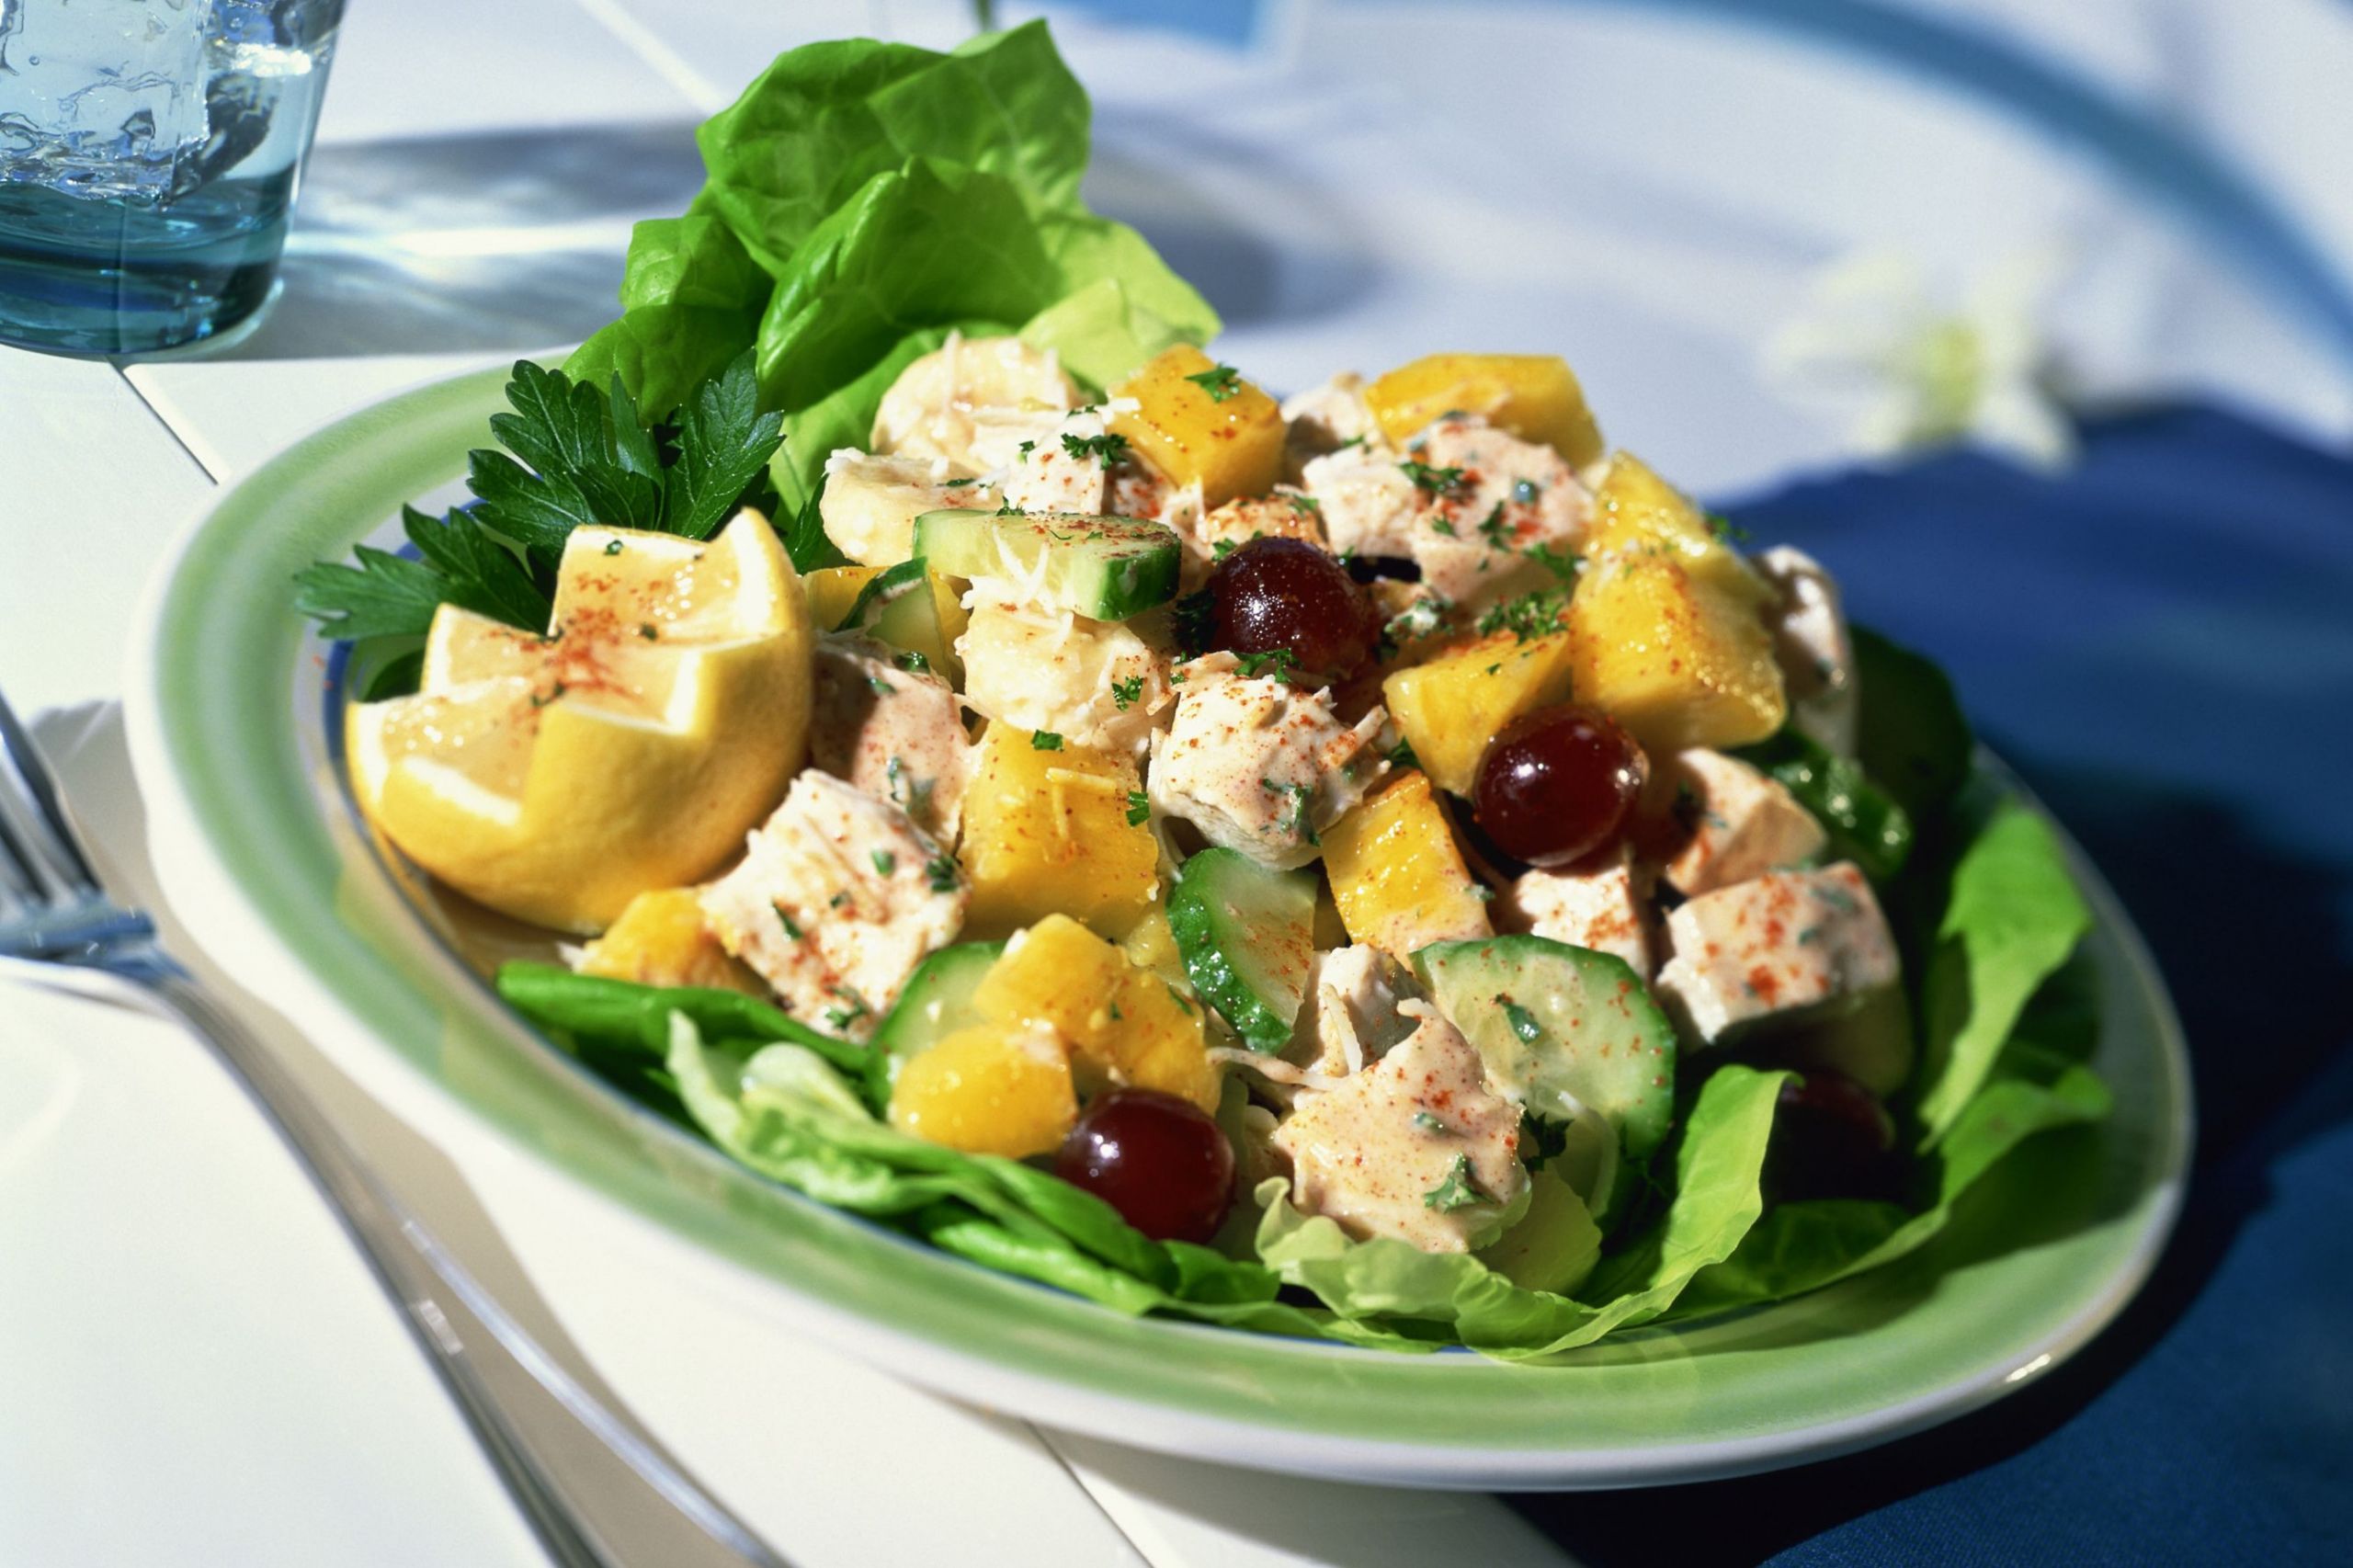 Turkey Salad With Grapes
 Special Turkey Salad Recipe With Grapes and Almonds